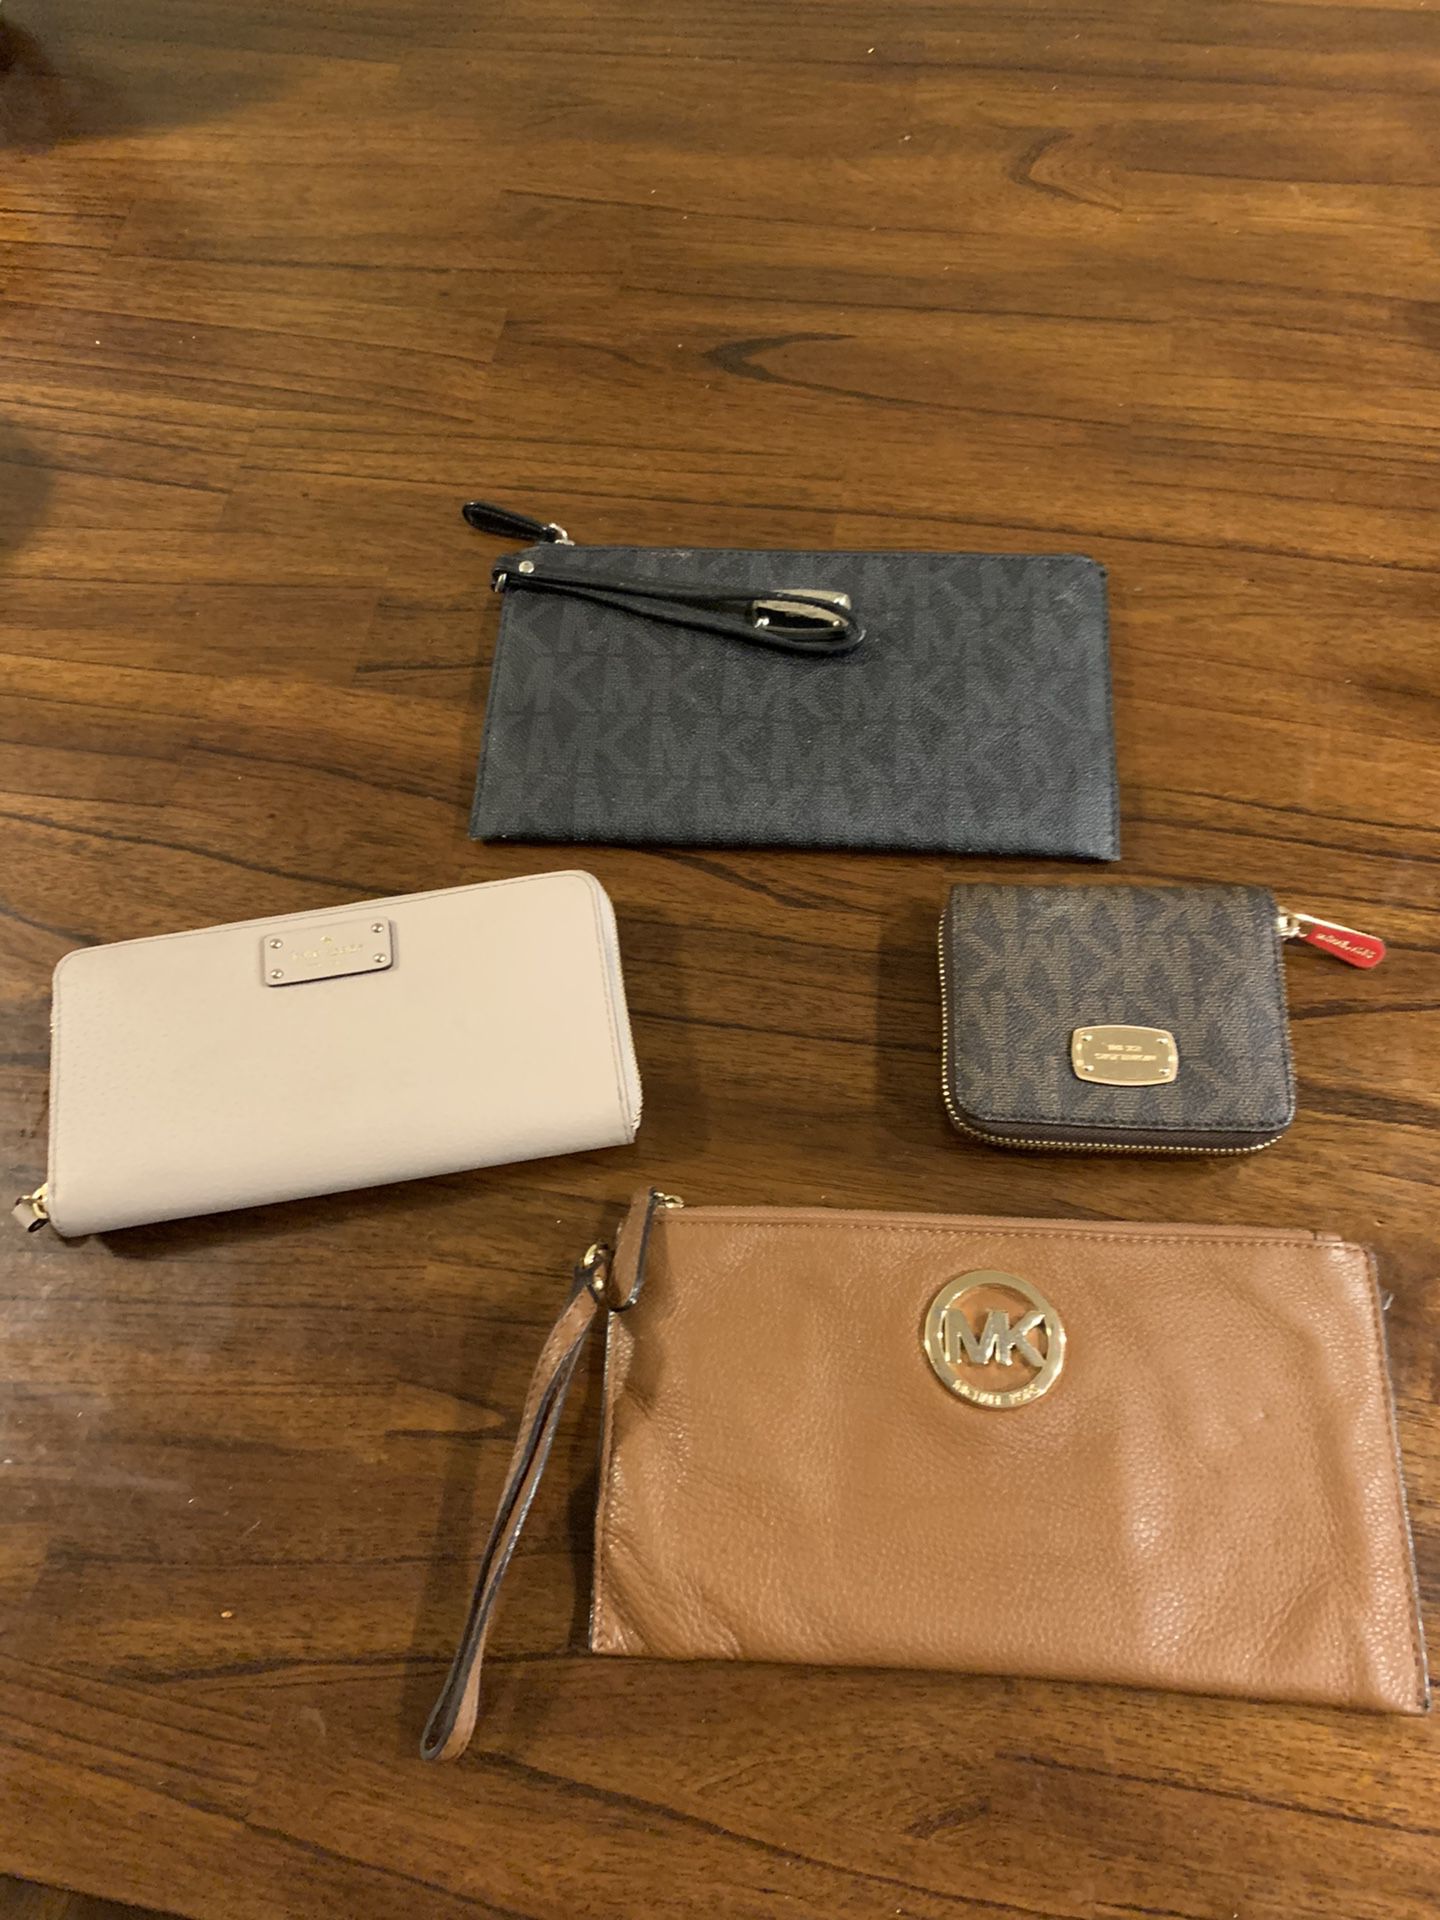 Michael Kors and Kate Spade wallets and wristlets